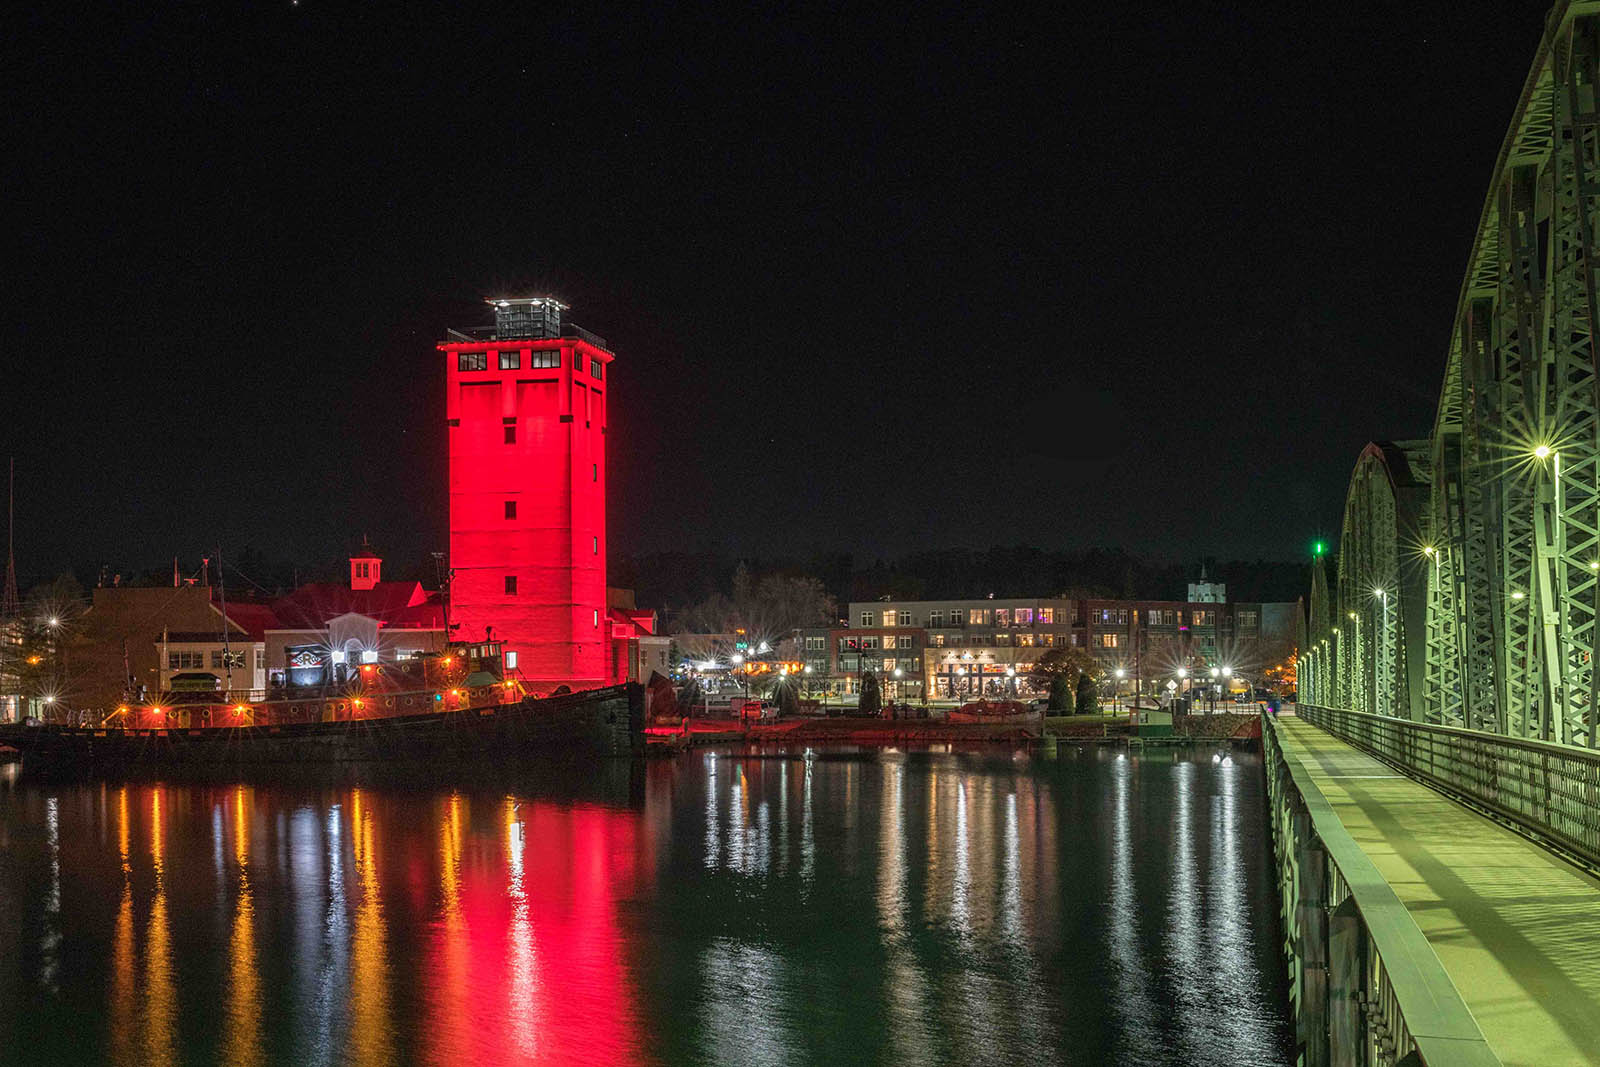 The 11 story tower with Red color-changing LED lights at the Door County Maritime Museum in Sturgeon Bay, WI